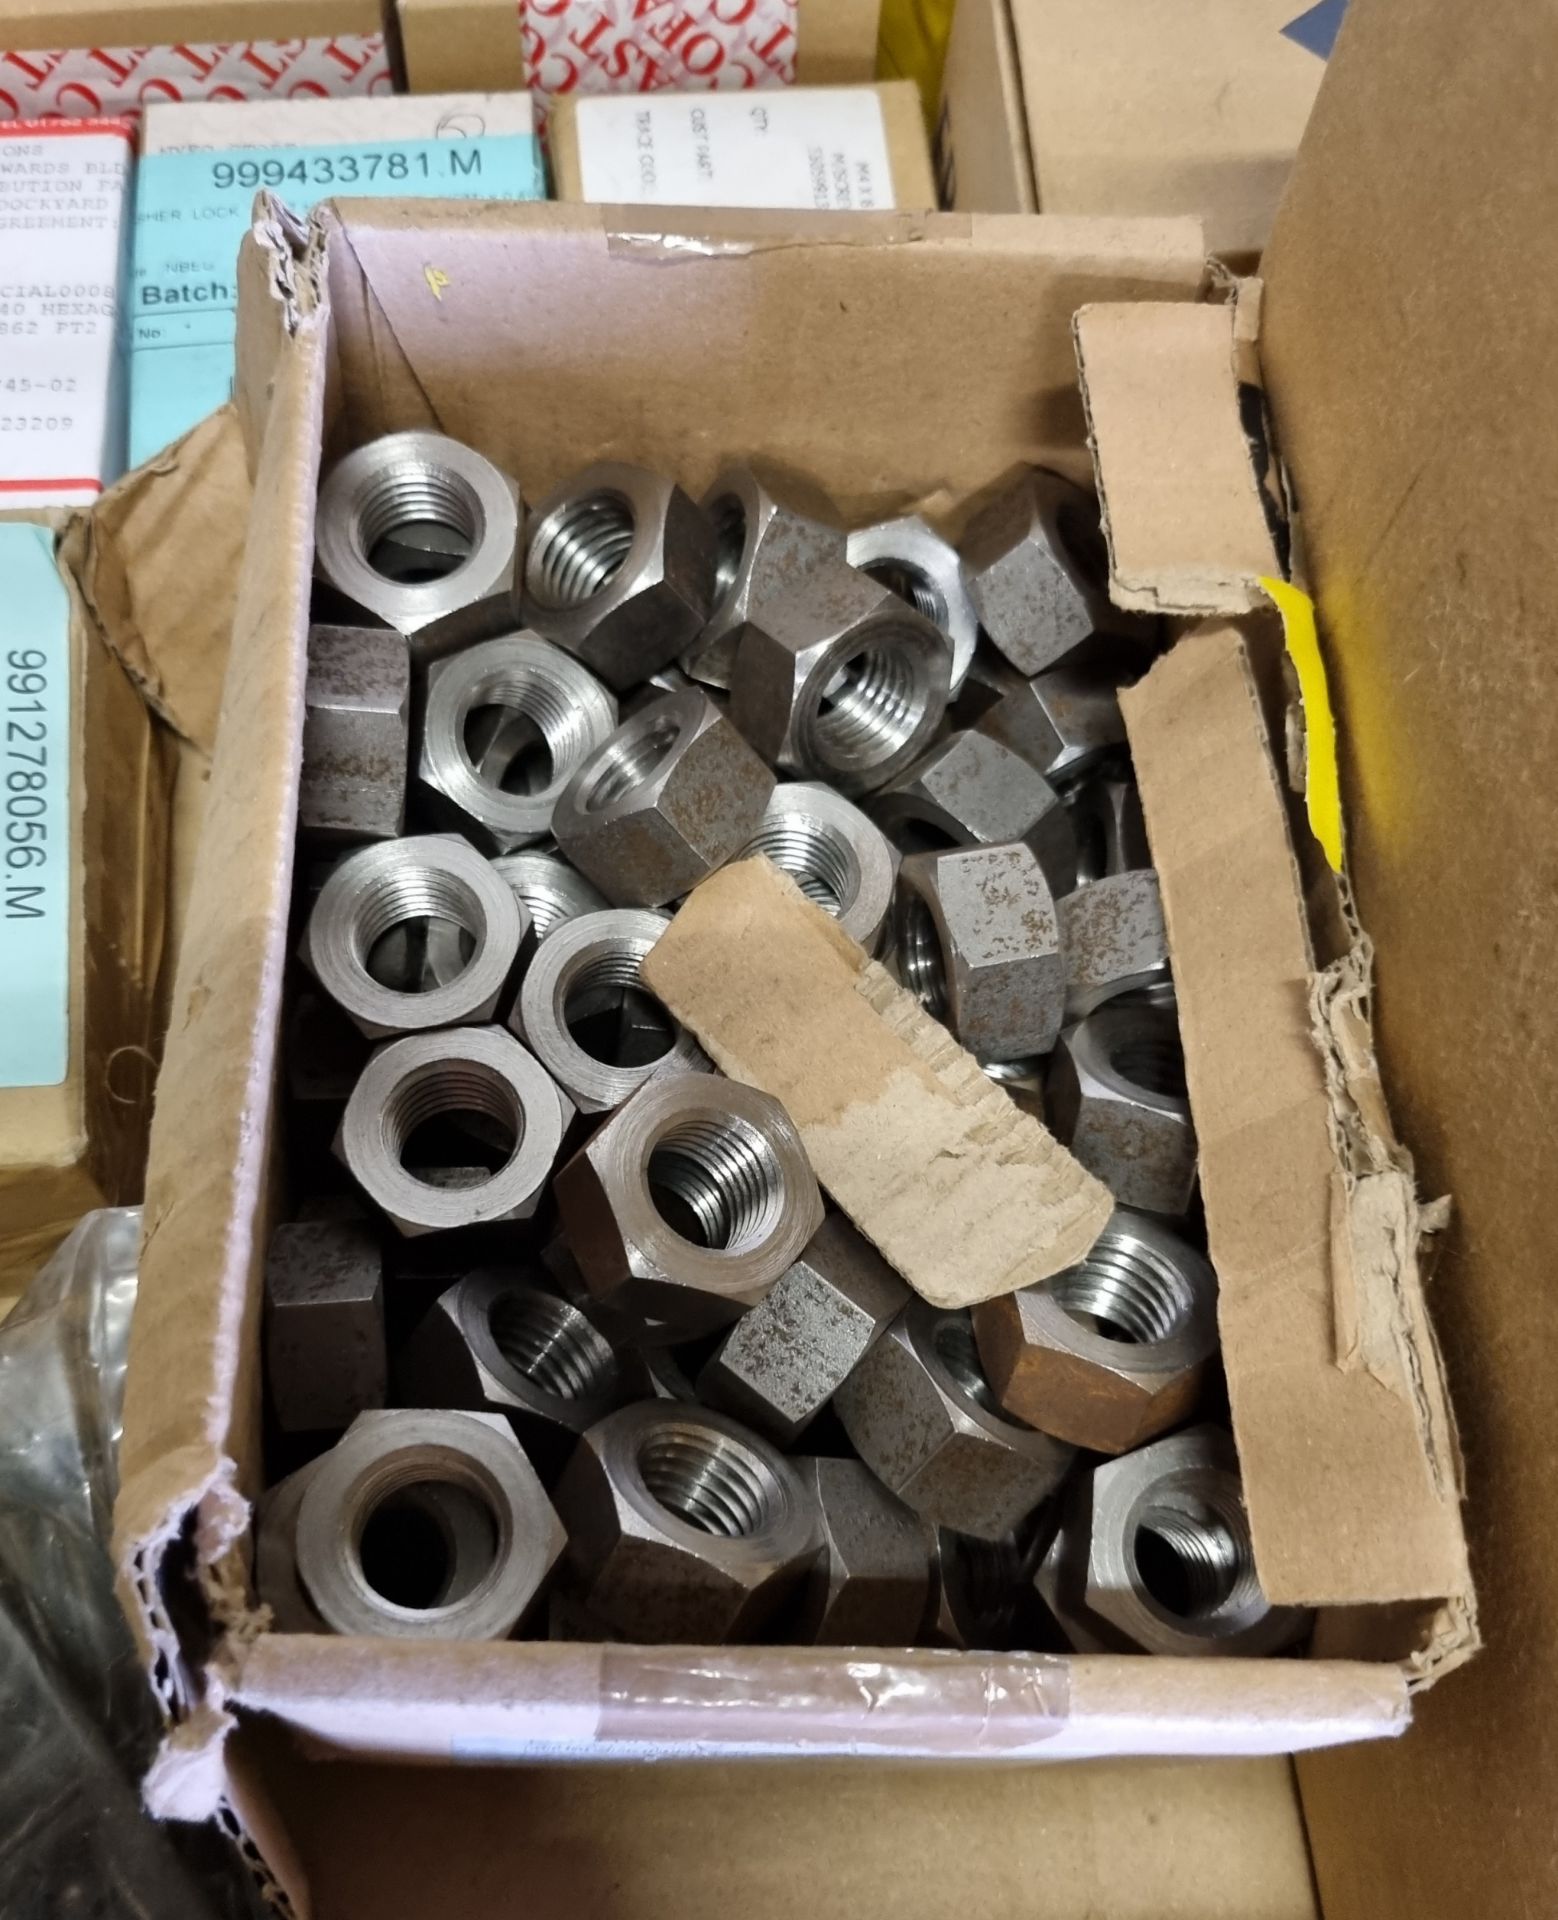 Workshop fasteners - bolts (M4, M6, M16, M20), nuts (M16, M20), washers and cotter pins - Image 3 of 5